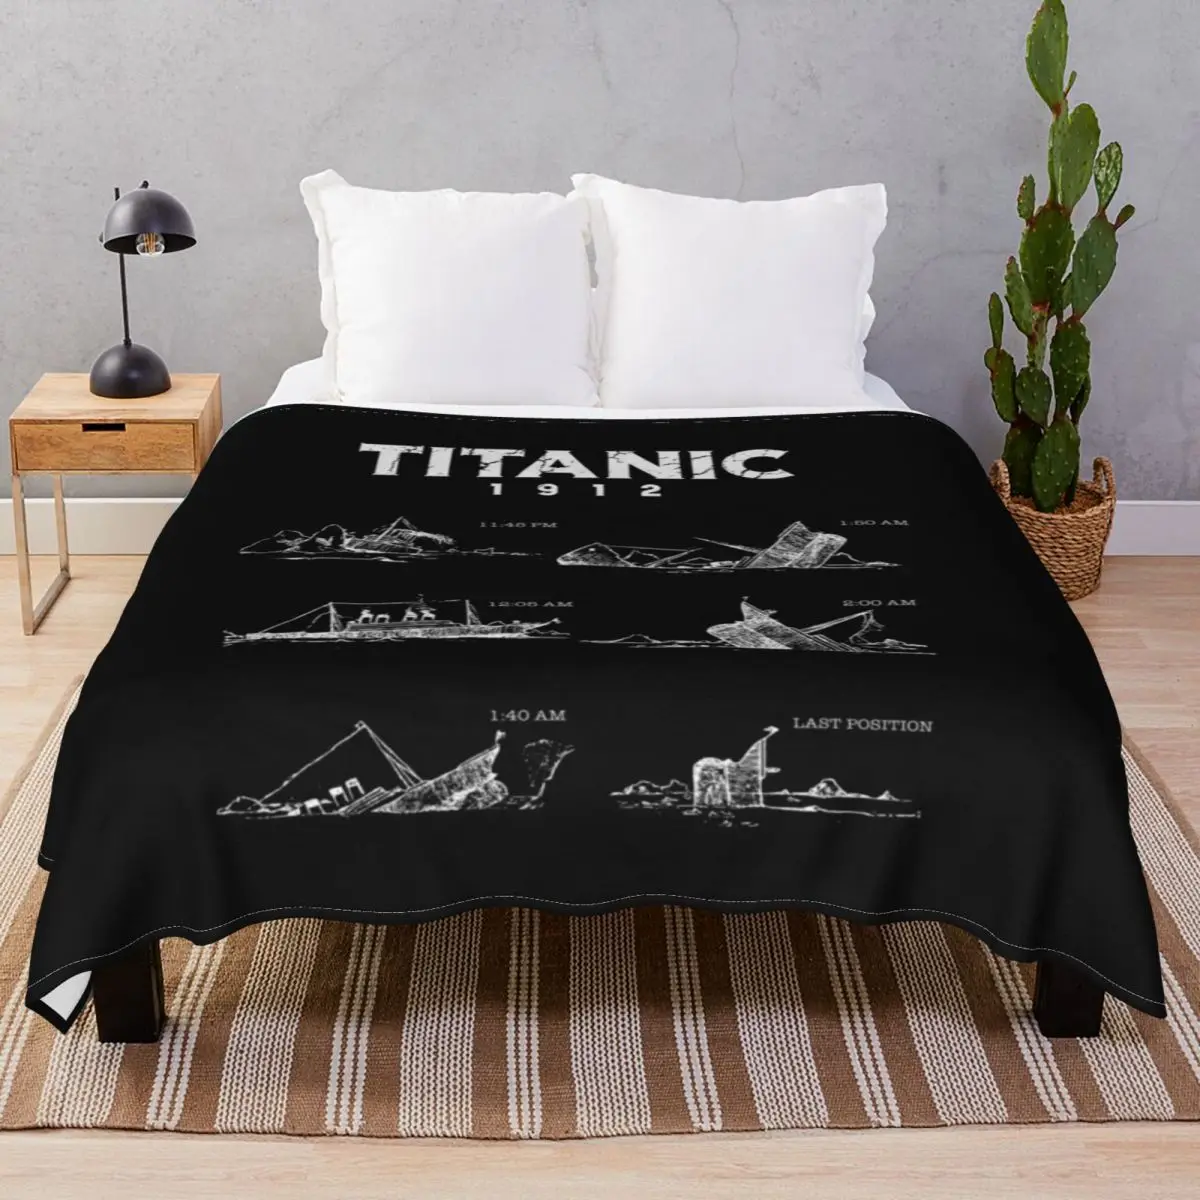 Sinking Titanic Ship 1912 Blanket Fleece Printed Ultra-Soft Throw Blankets for Bed Home Couch Travel Office